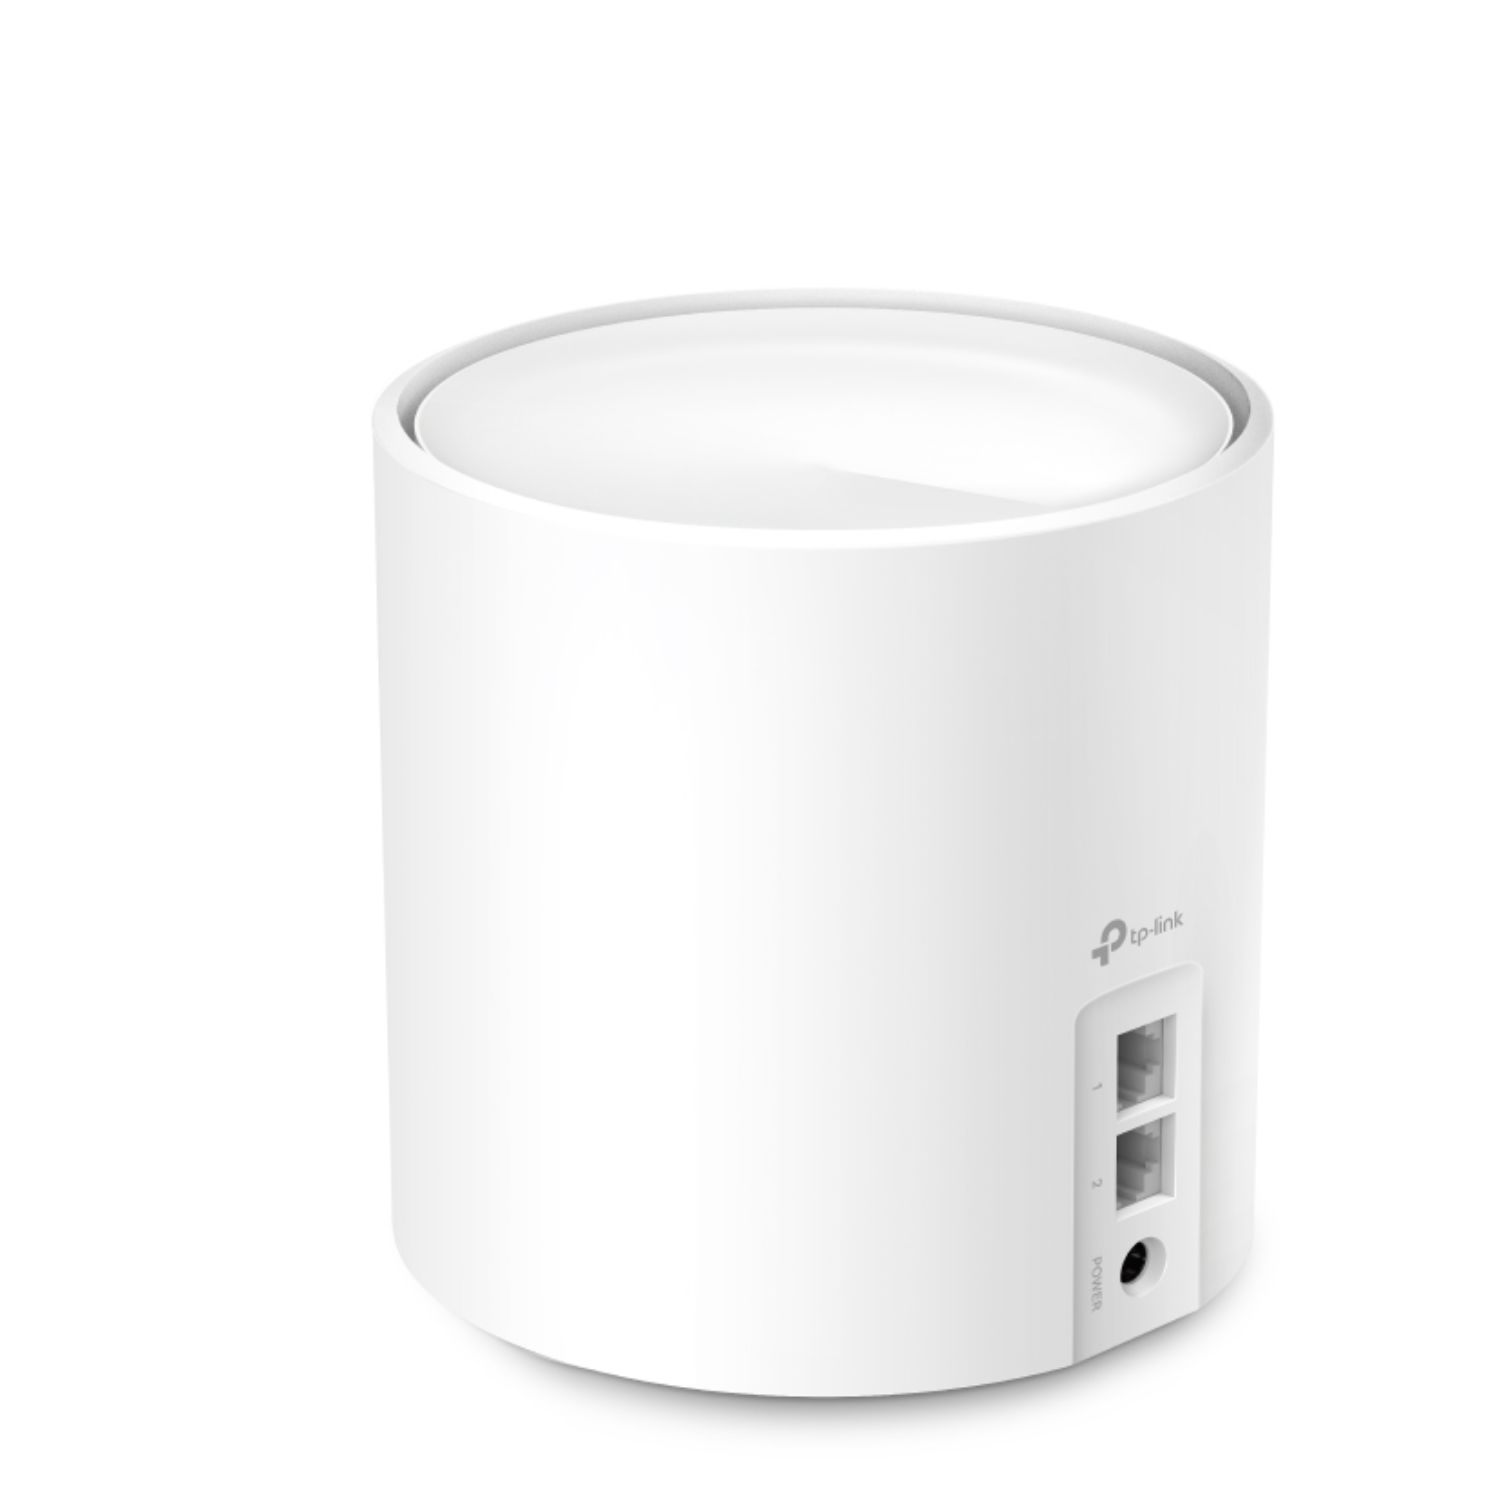 TP-Link Deco X60 (1-pack) AX5400 Whole Home Mesh Wi-Fi 6 System